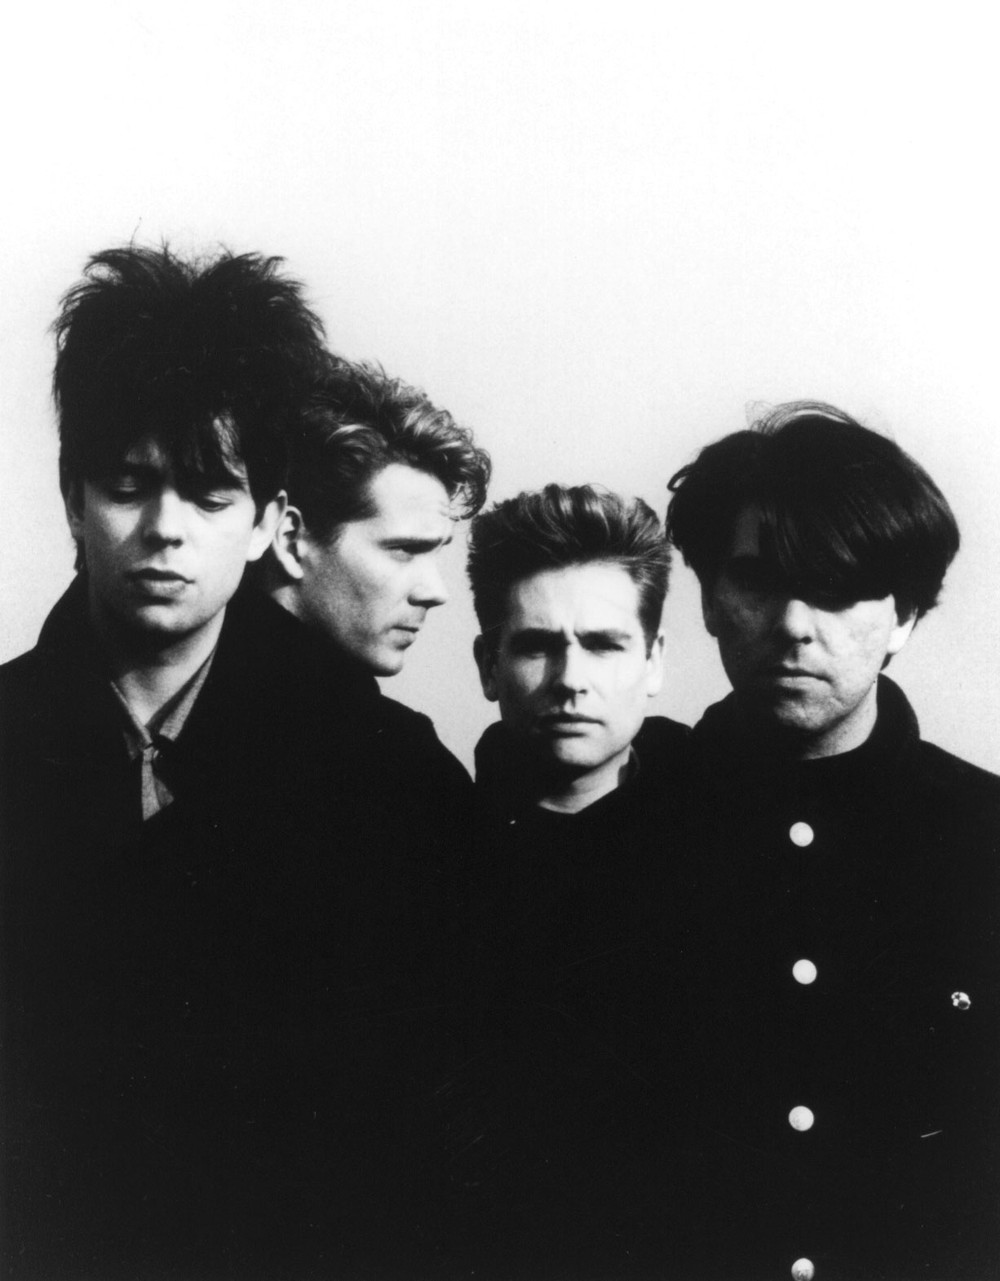 Echo and The Bunnymen: Songs To Learn - Sing al History Tickets